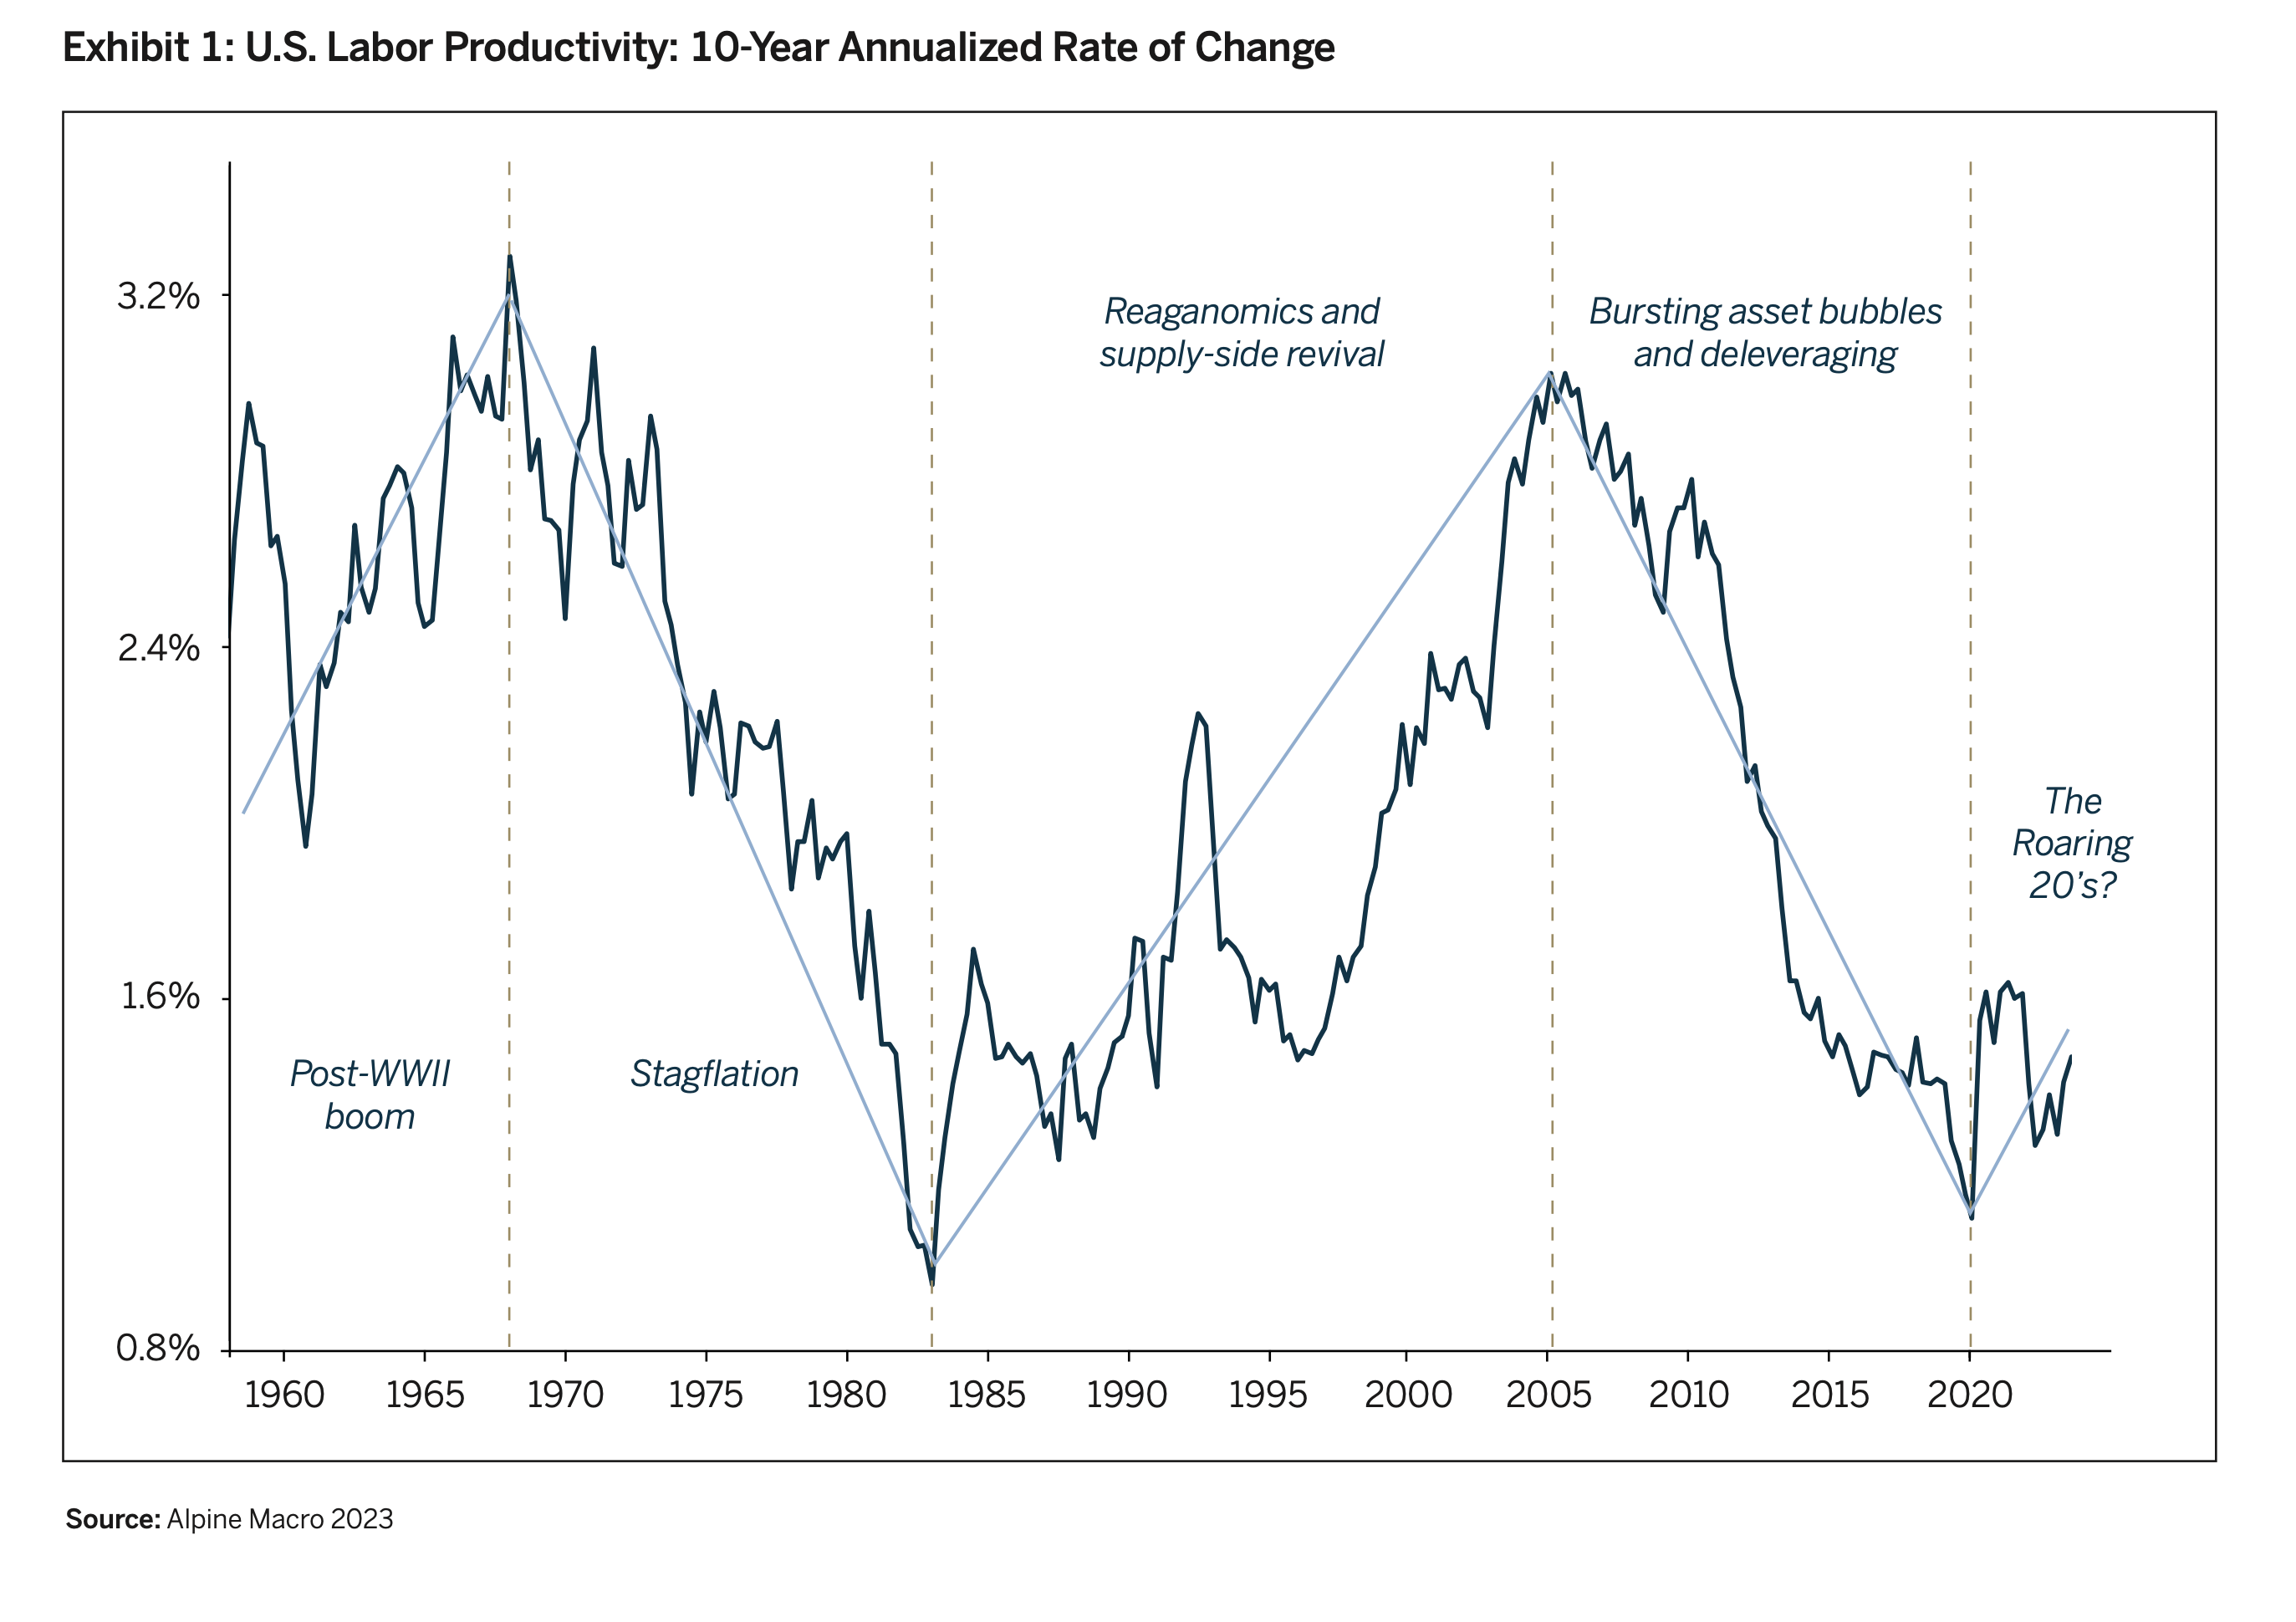 U.S. Labor Productivity: 10-Year Annualized Rate of Change